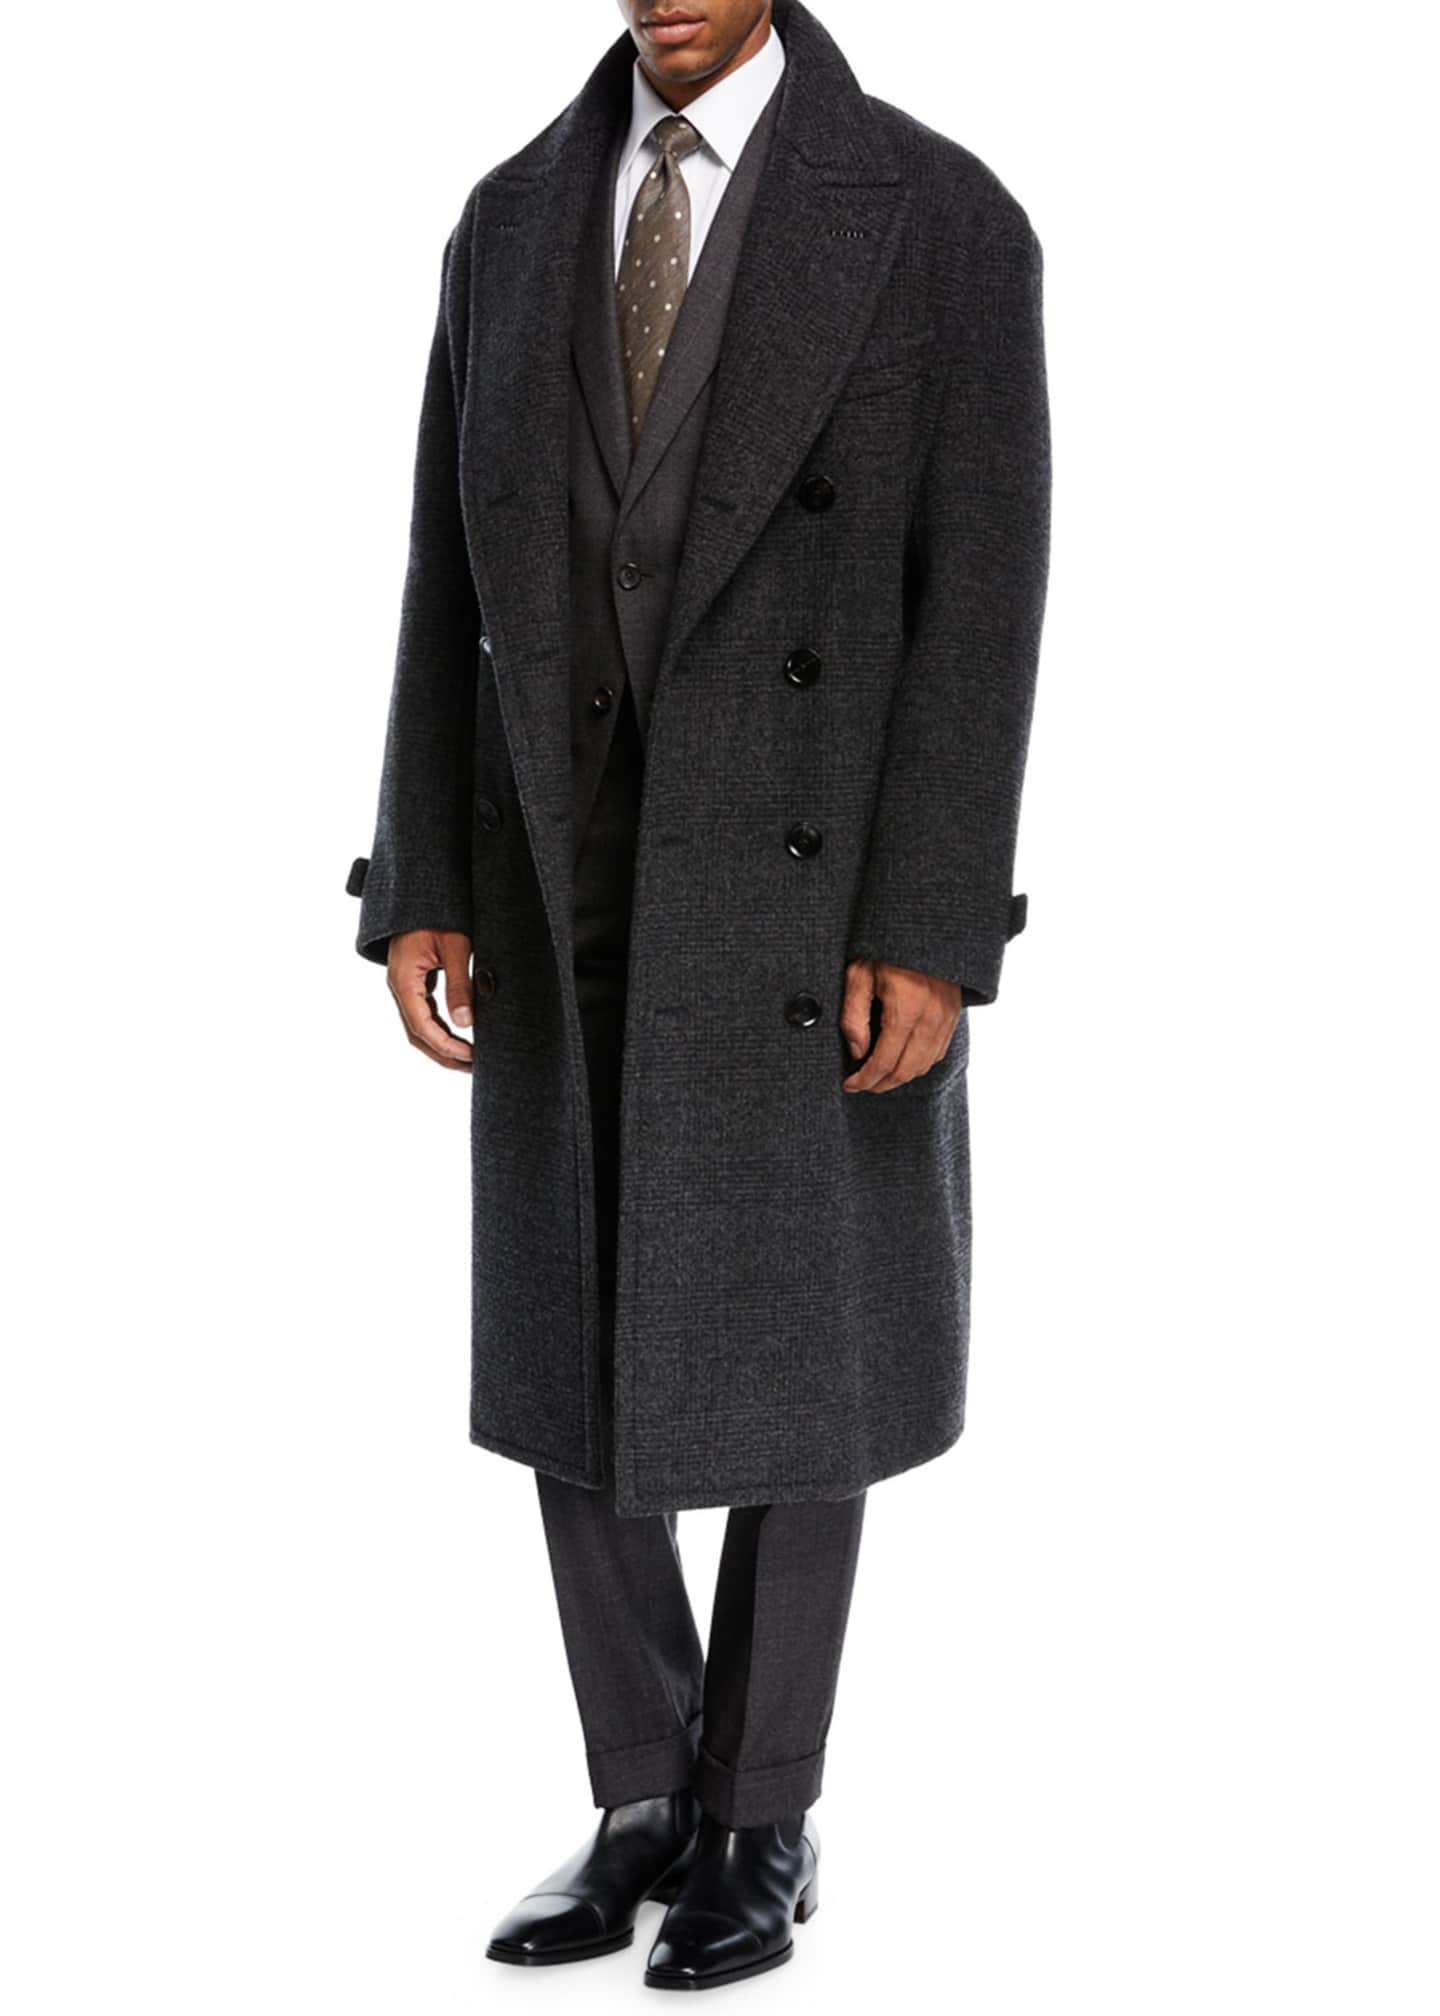 TOM FORD Plaid Double-Breasted Overcoat - Bergdorf Goodman